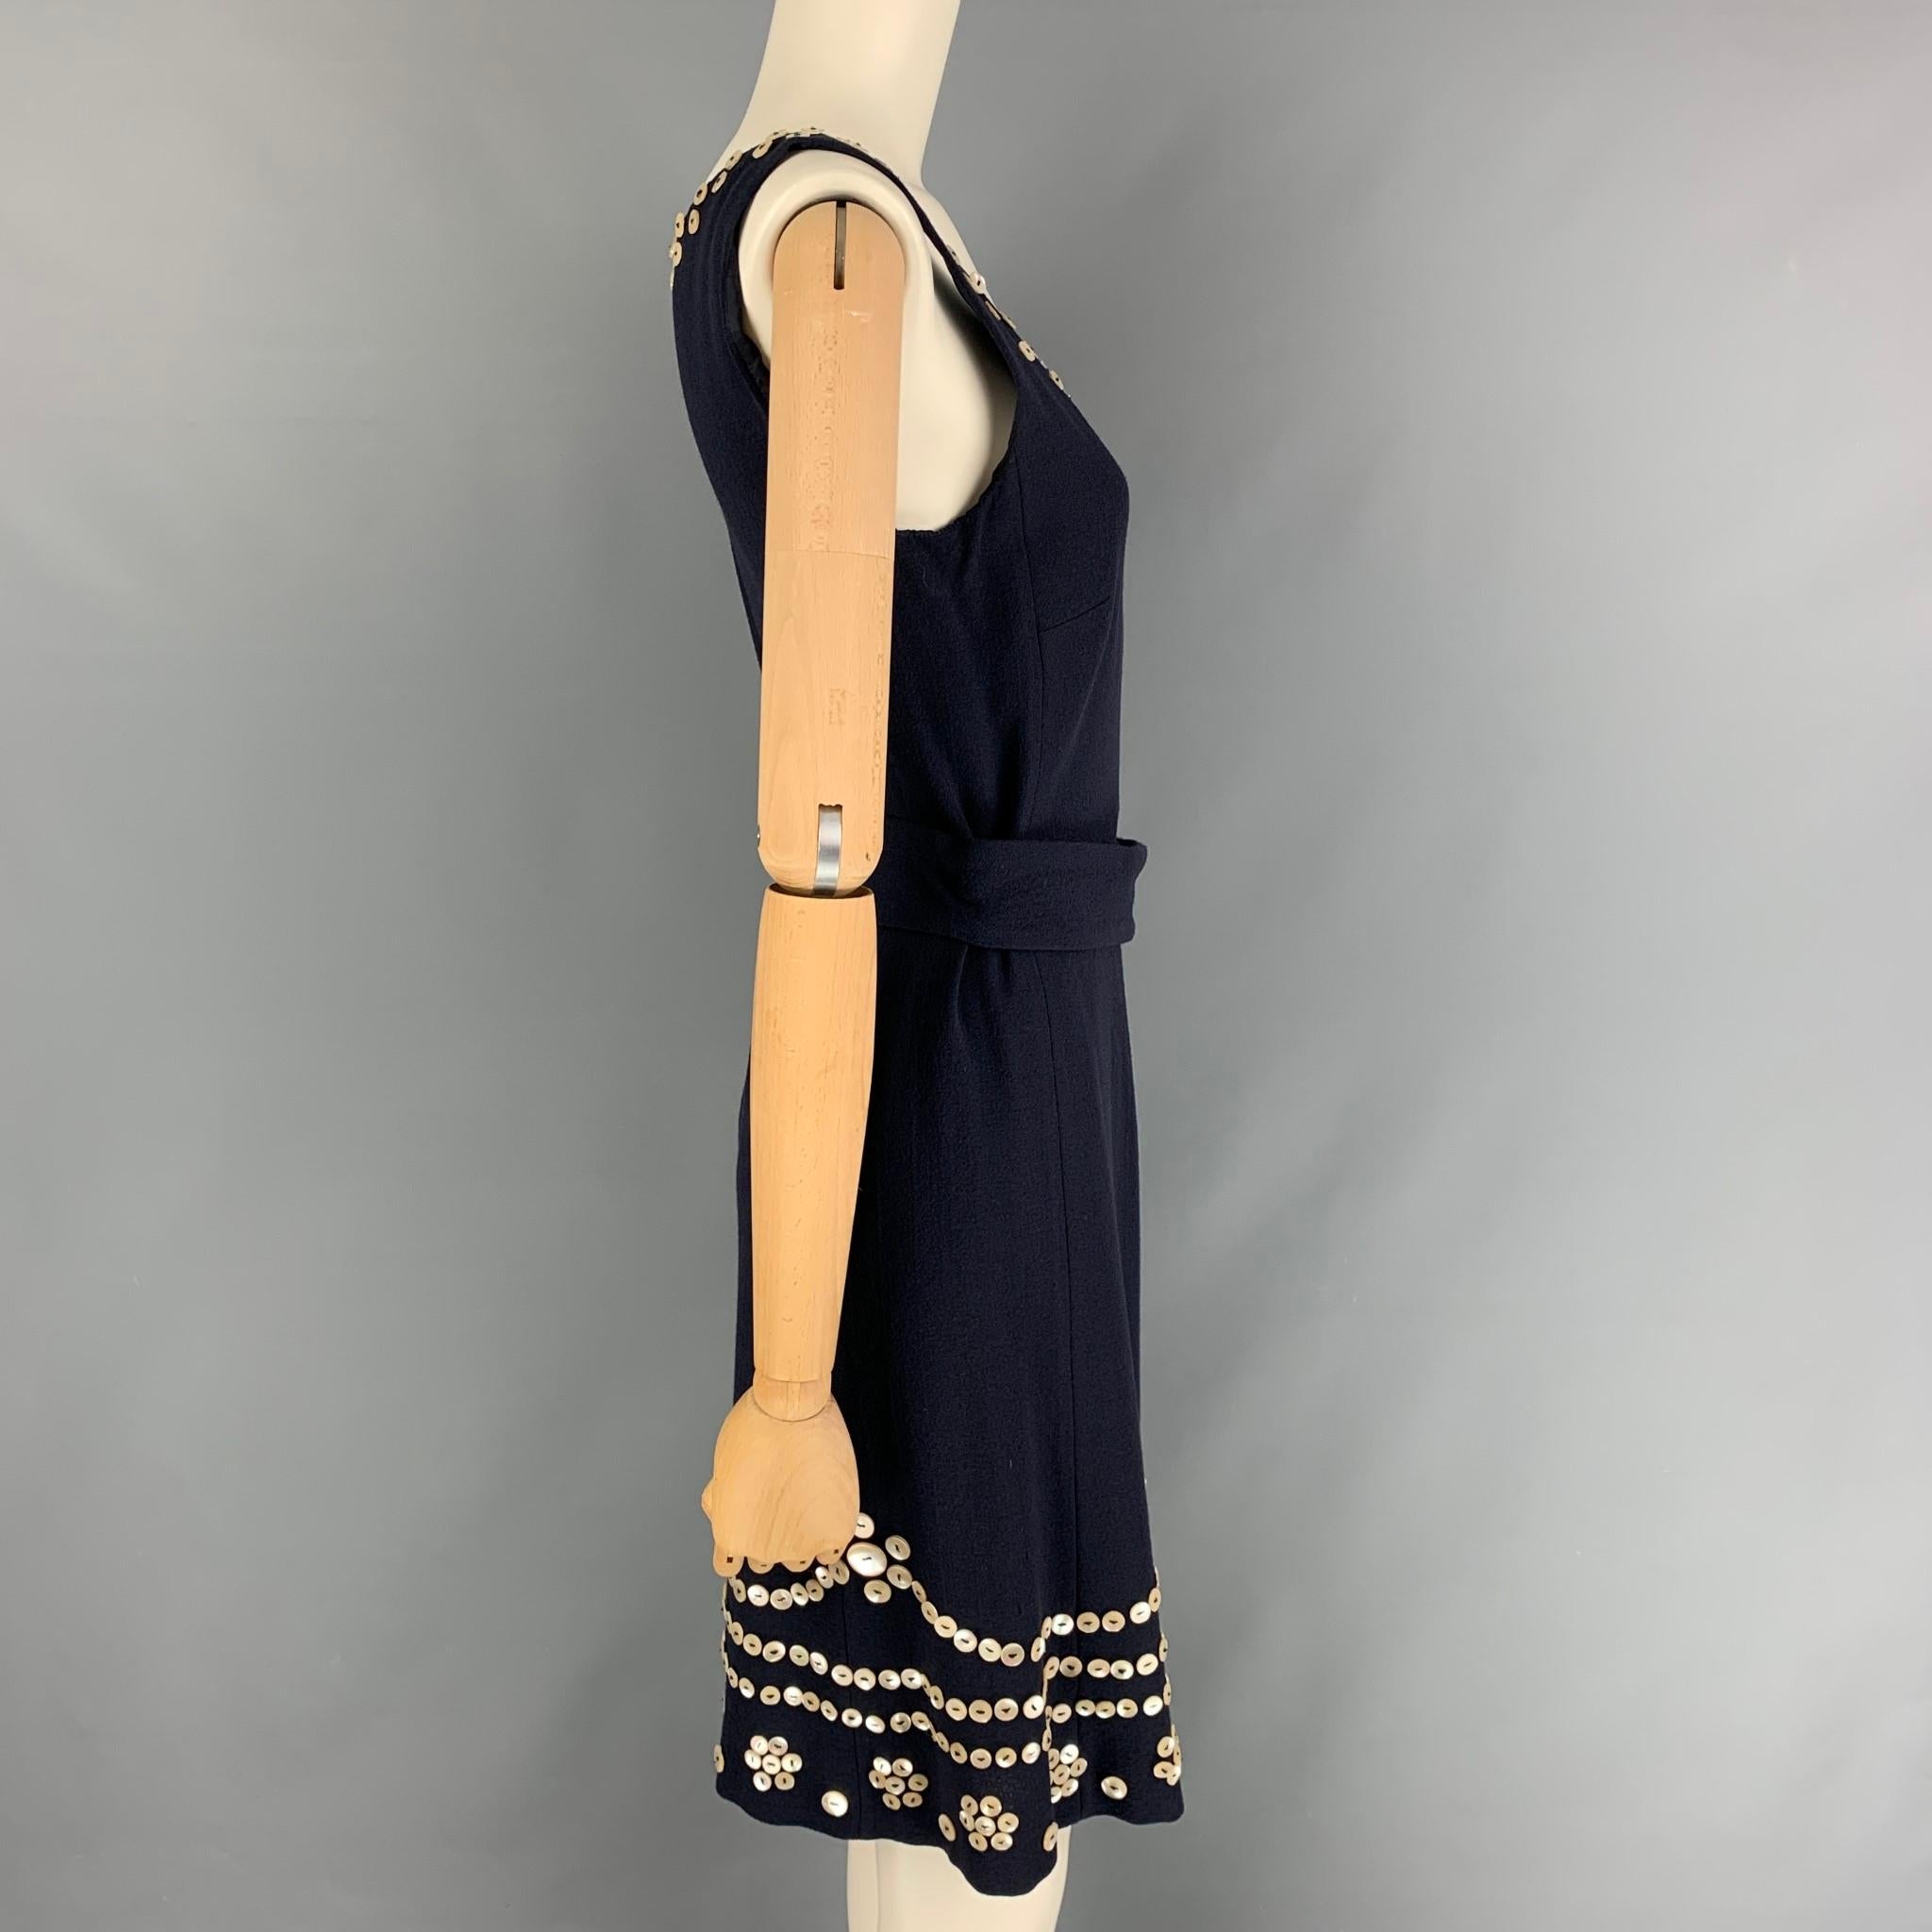 Vintage MOSCHINO dress comes in a navy wool with a slip liner featuring a shift style, belt strap, buttoned applique details, and a side zip up closure. Made in Italy.

Very Good Pre-Owned Condition.
Marked: I 42 / D 38 / F 38 / GB 10 / USA